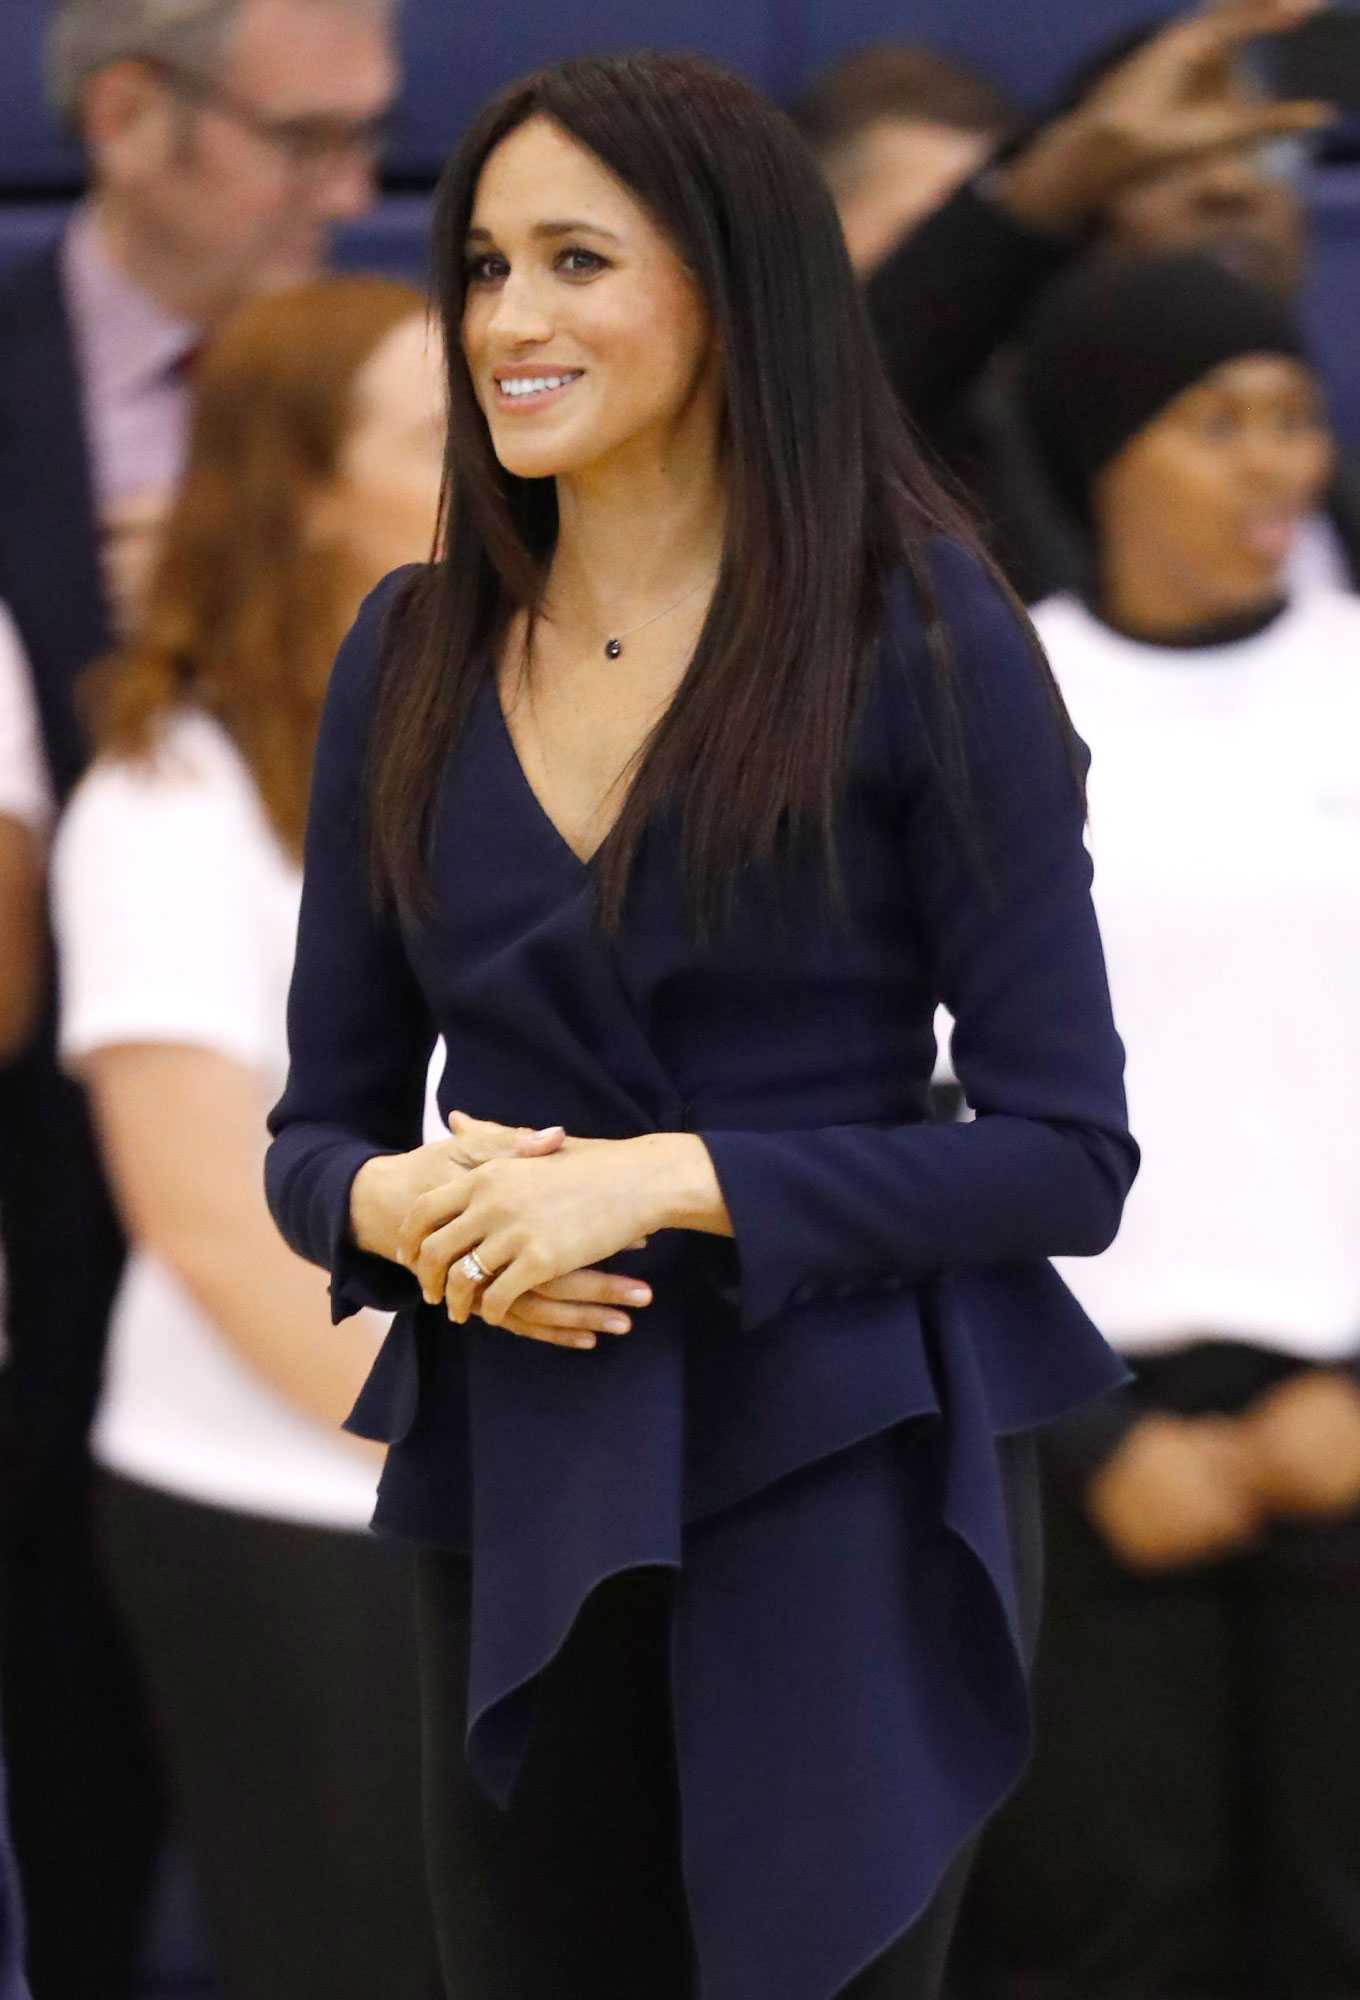 70+ Hot Pictures Of Meghan Markle Which Are Just Too Hot To Handle 6